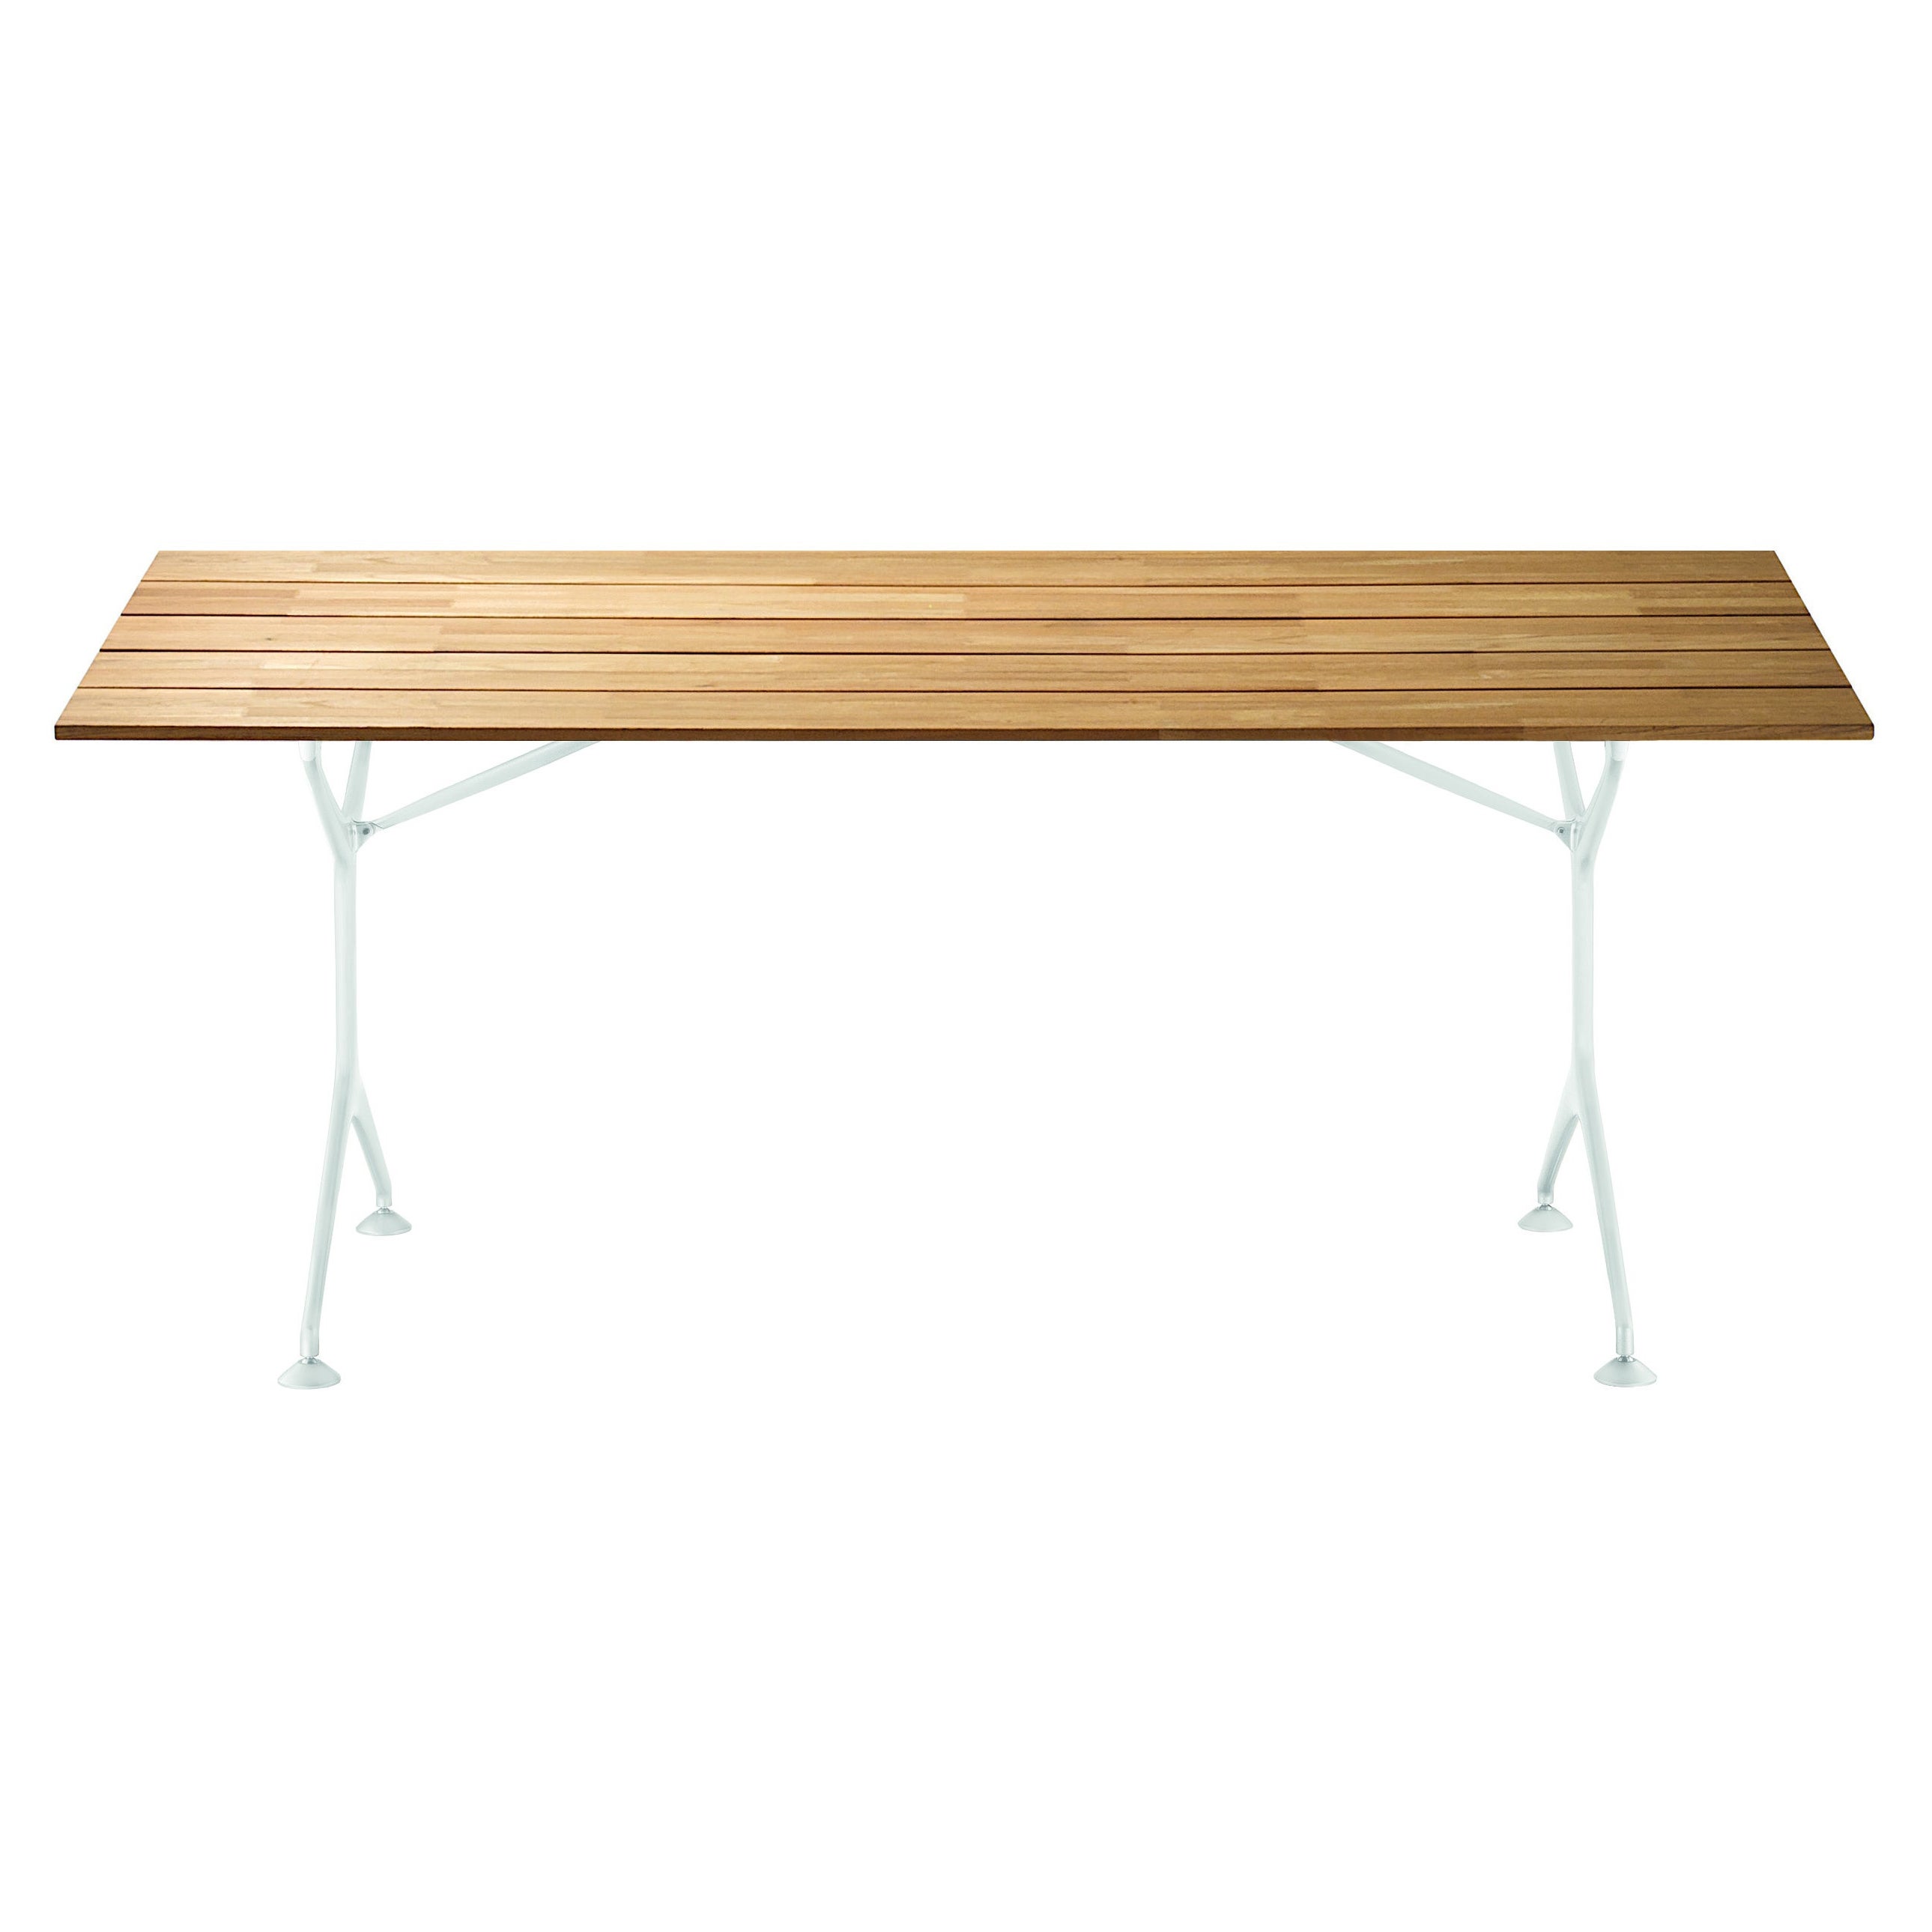 Alias Tech Wood Table 200F in Teak and Lacquered Aluminium Frame by Alberto Meda For Sale